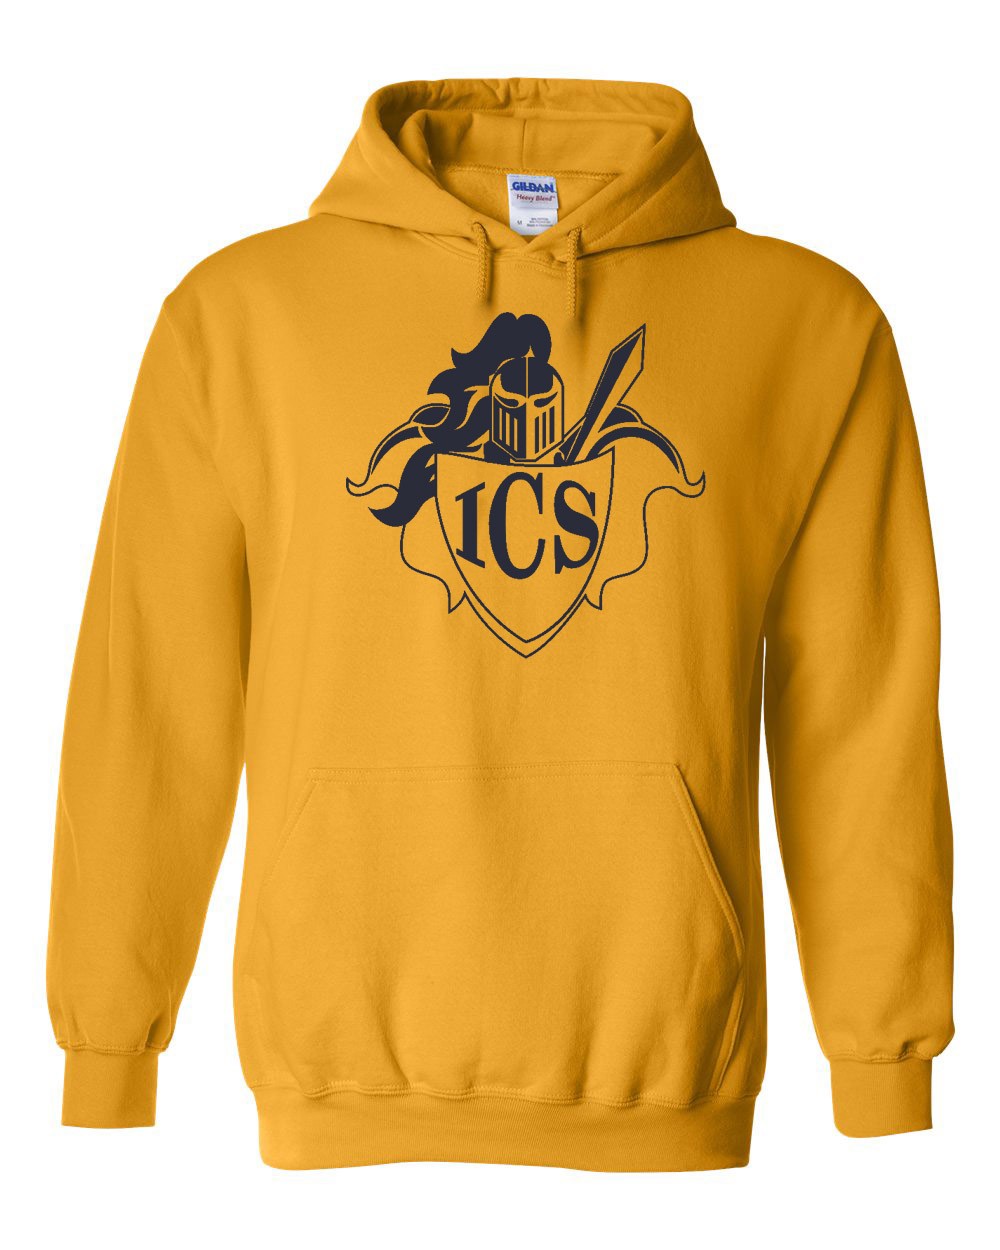 ICS Staff Pullover Hoodie w/ Navy Logo #F22- Please allow 2-3 Weeks for Delivery